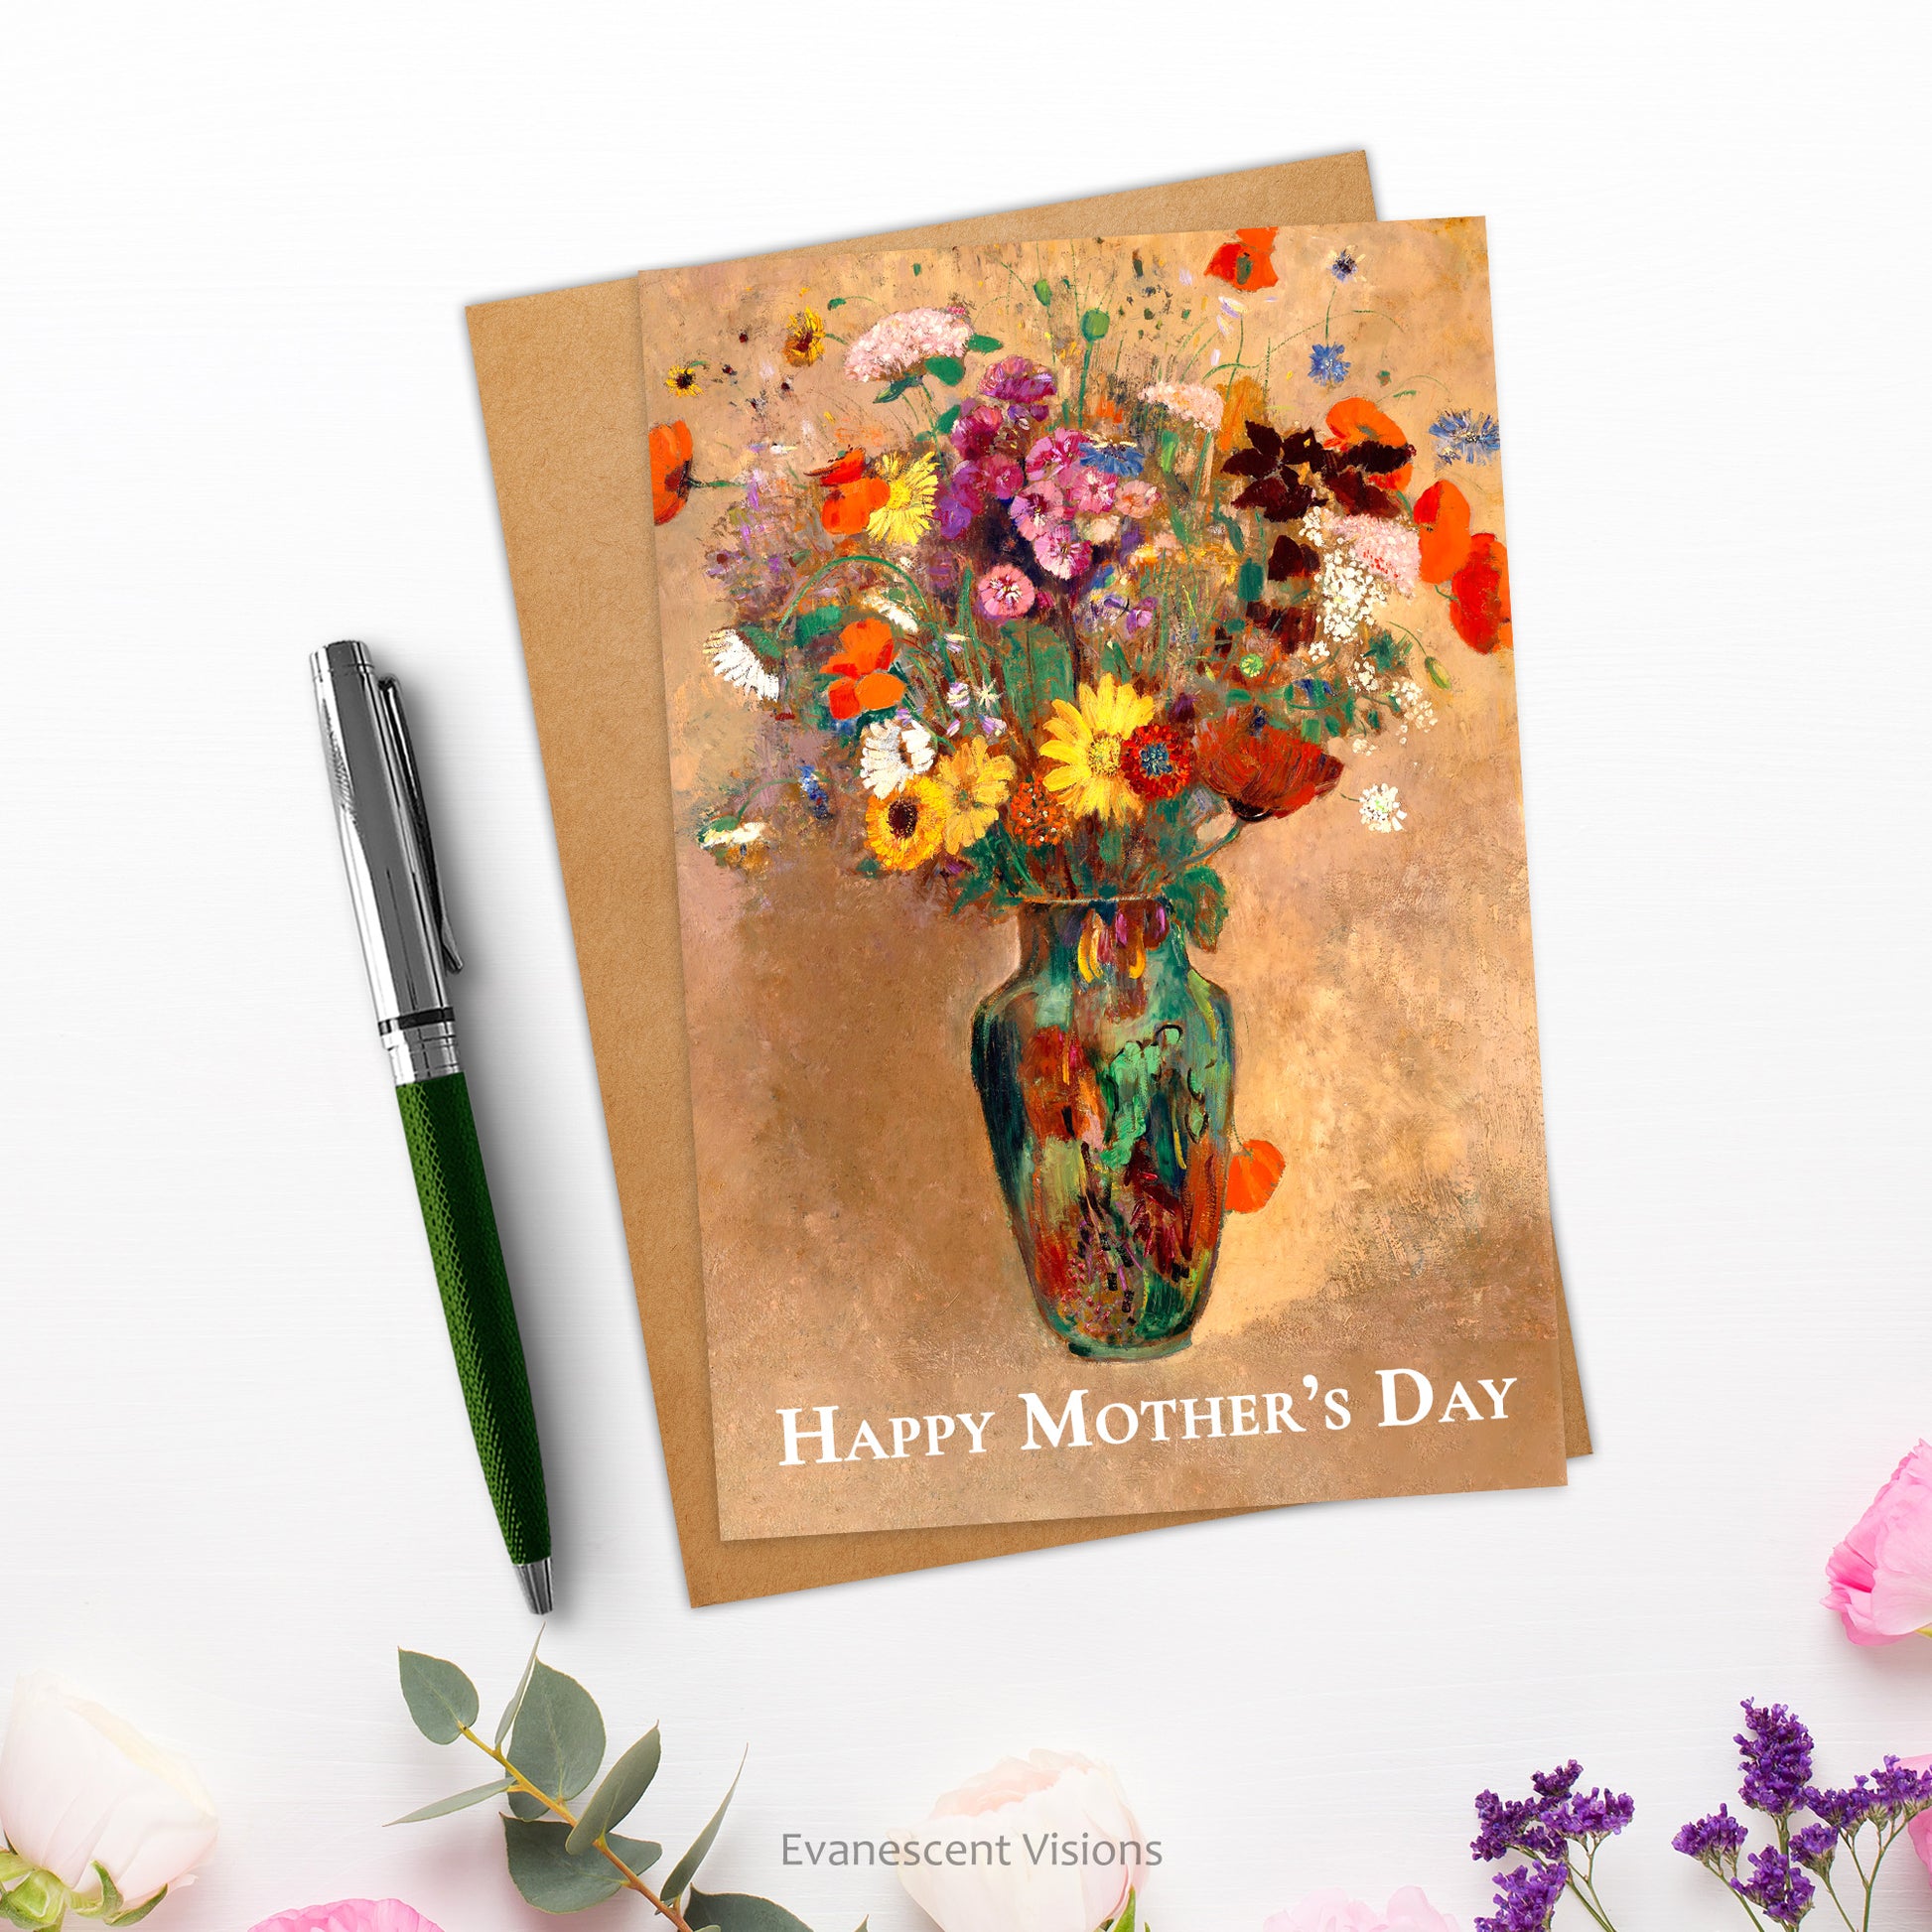 Card and envelope. Card has bouquet of flowers in vase and the words, 'Happy Mother's Day' on the front. They are shown on a white surface next to a pen and with flowers near the bottom.